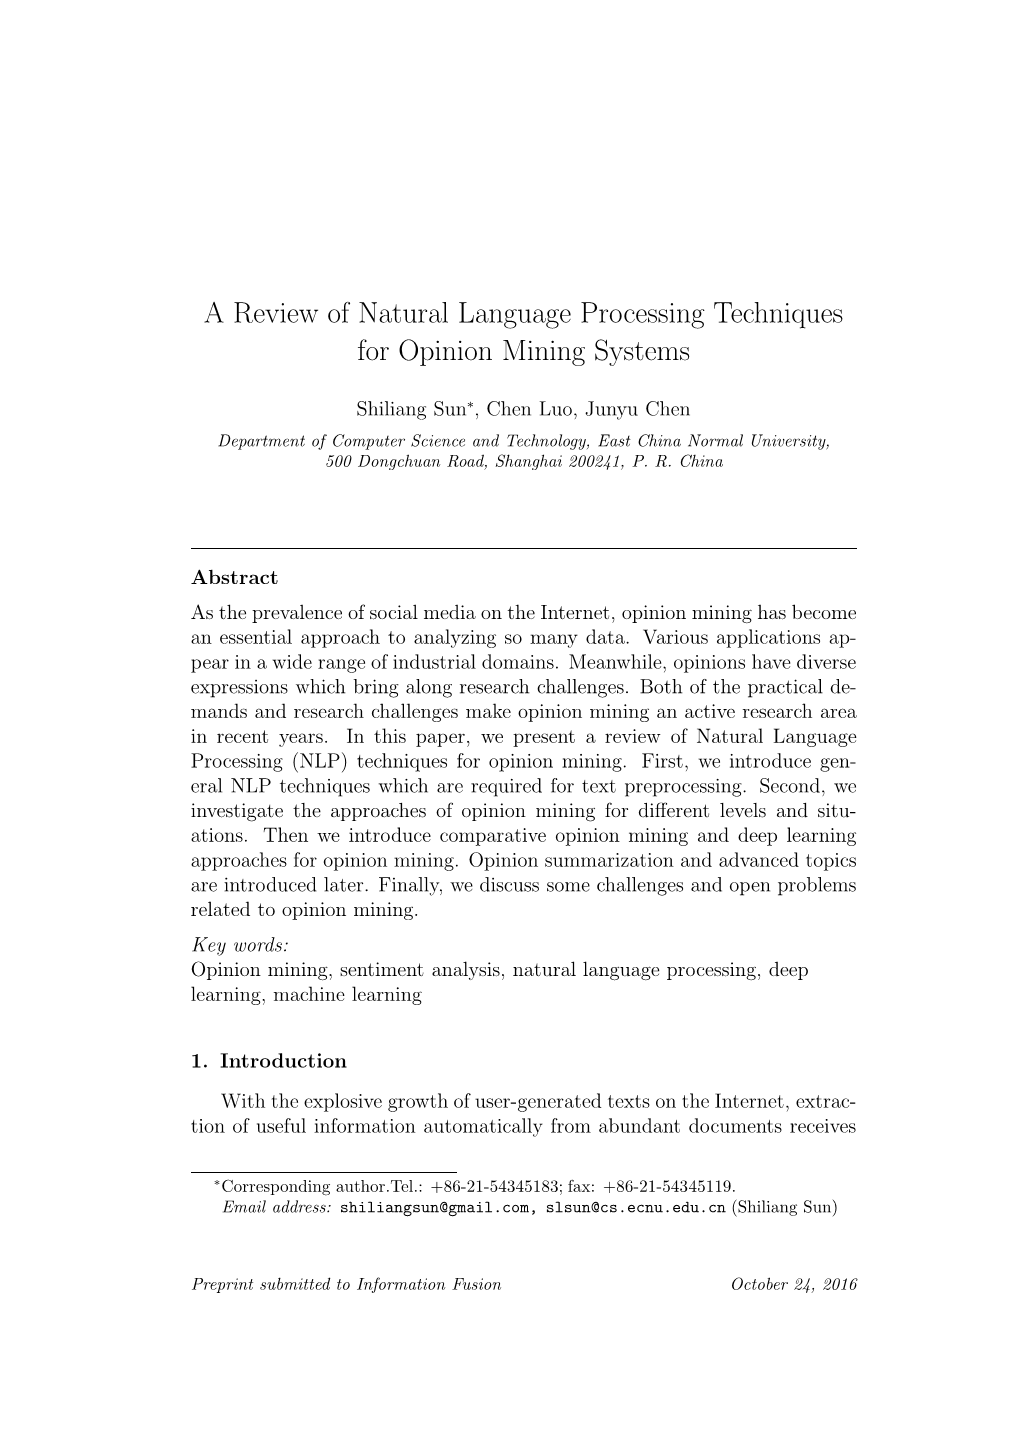 A Review of Natural Language Processing Techniques for Opinion Mining Systems